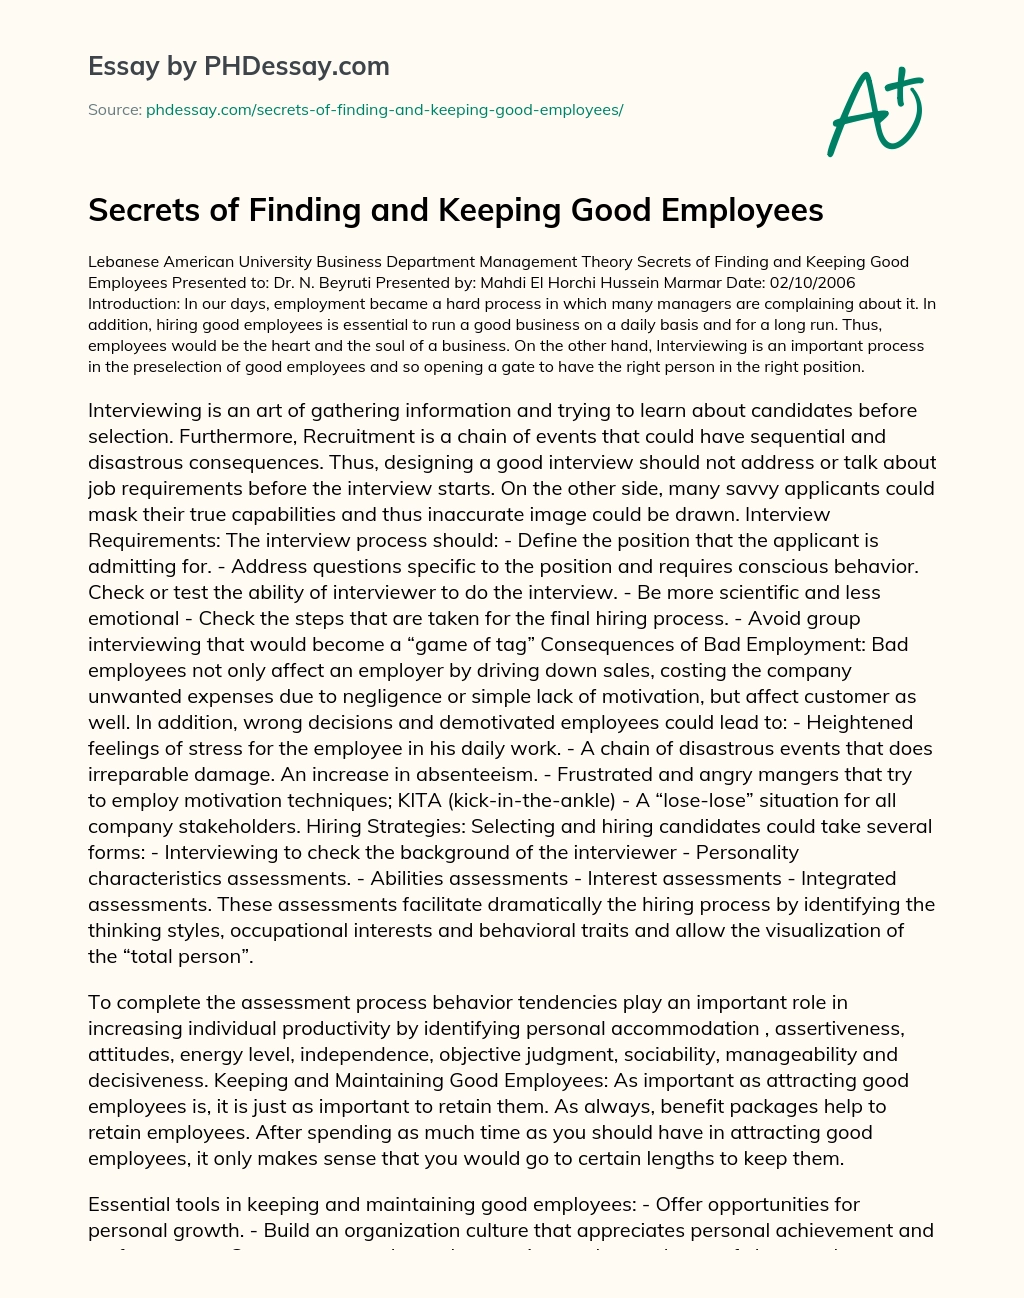 Secrets of Finding and Keeping Good Employees essay